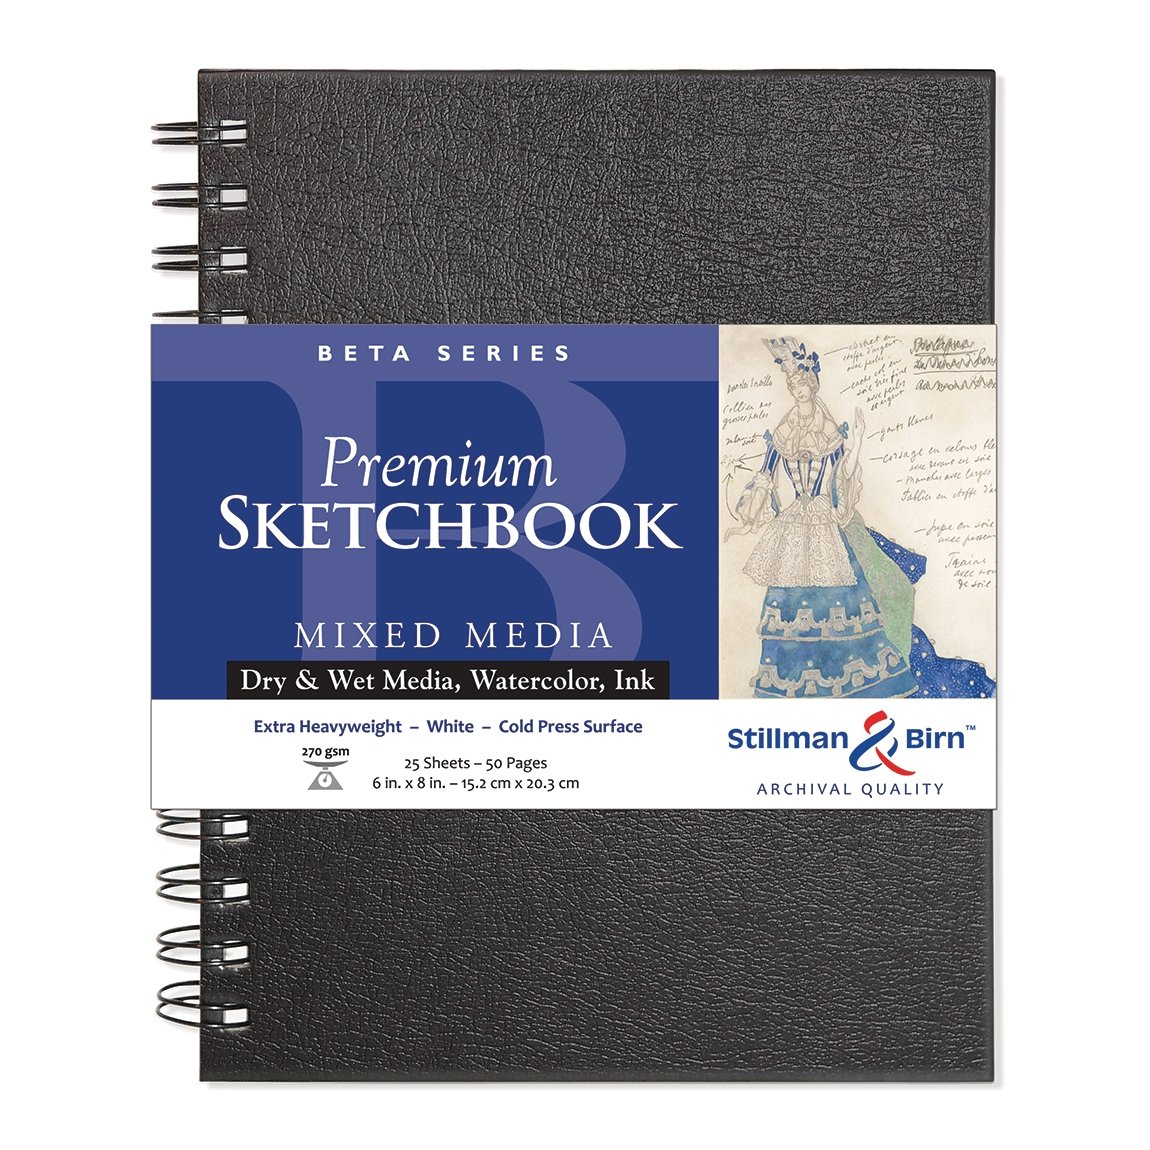 Hahnemuehle Nostalgie Hard Cover Sketch Book 4.1x5.8 inch (A6